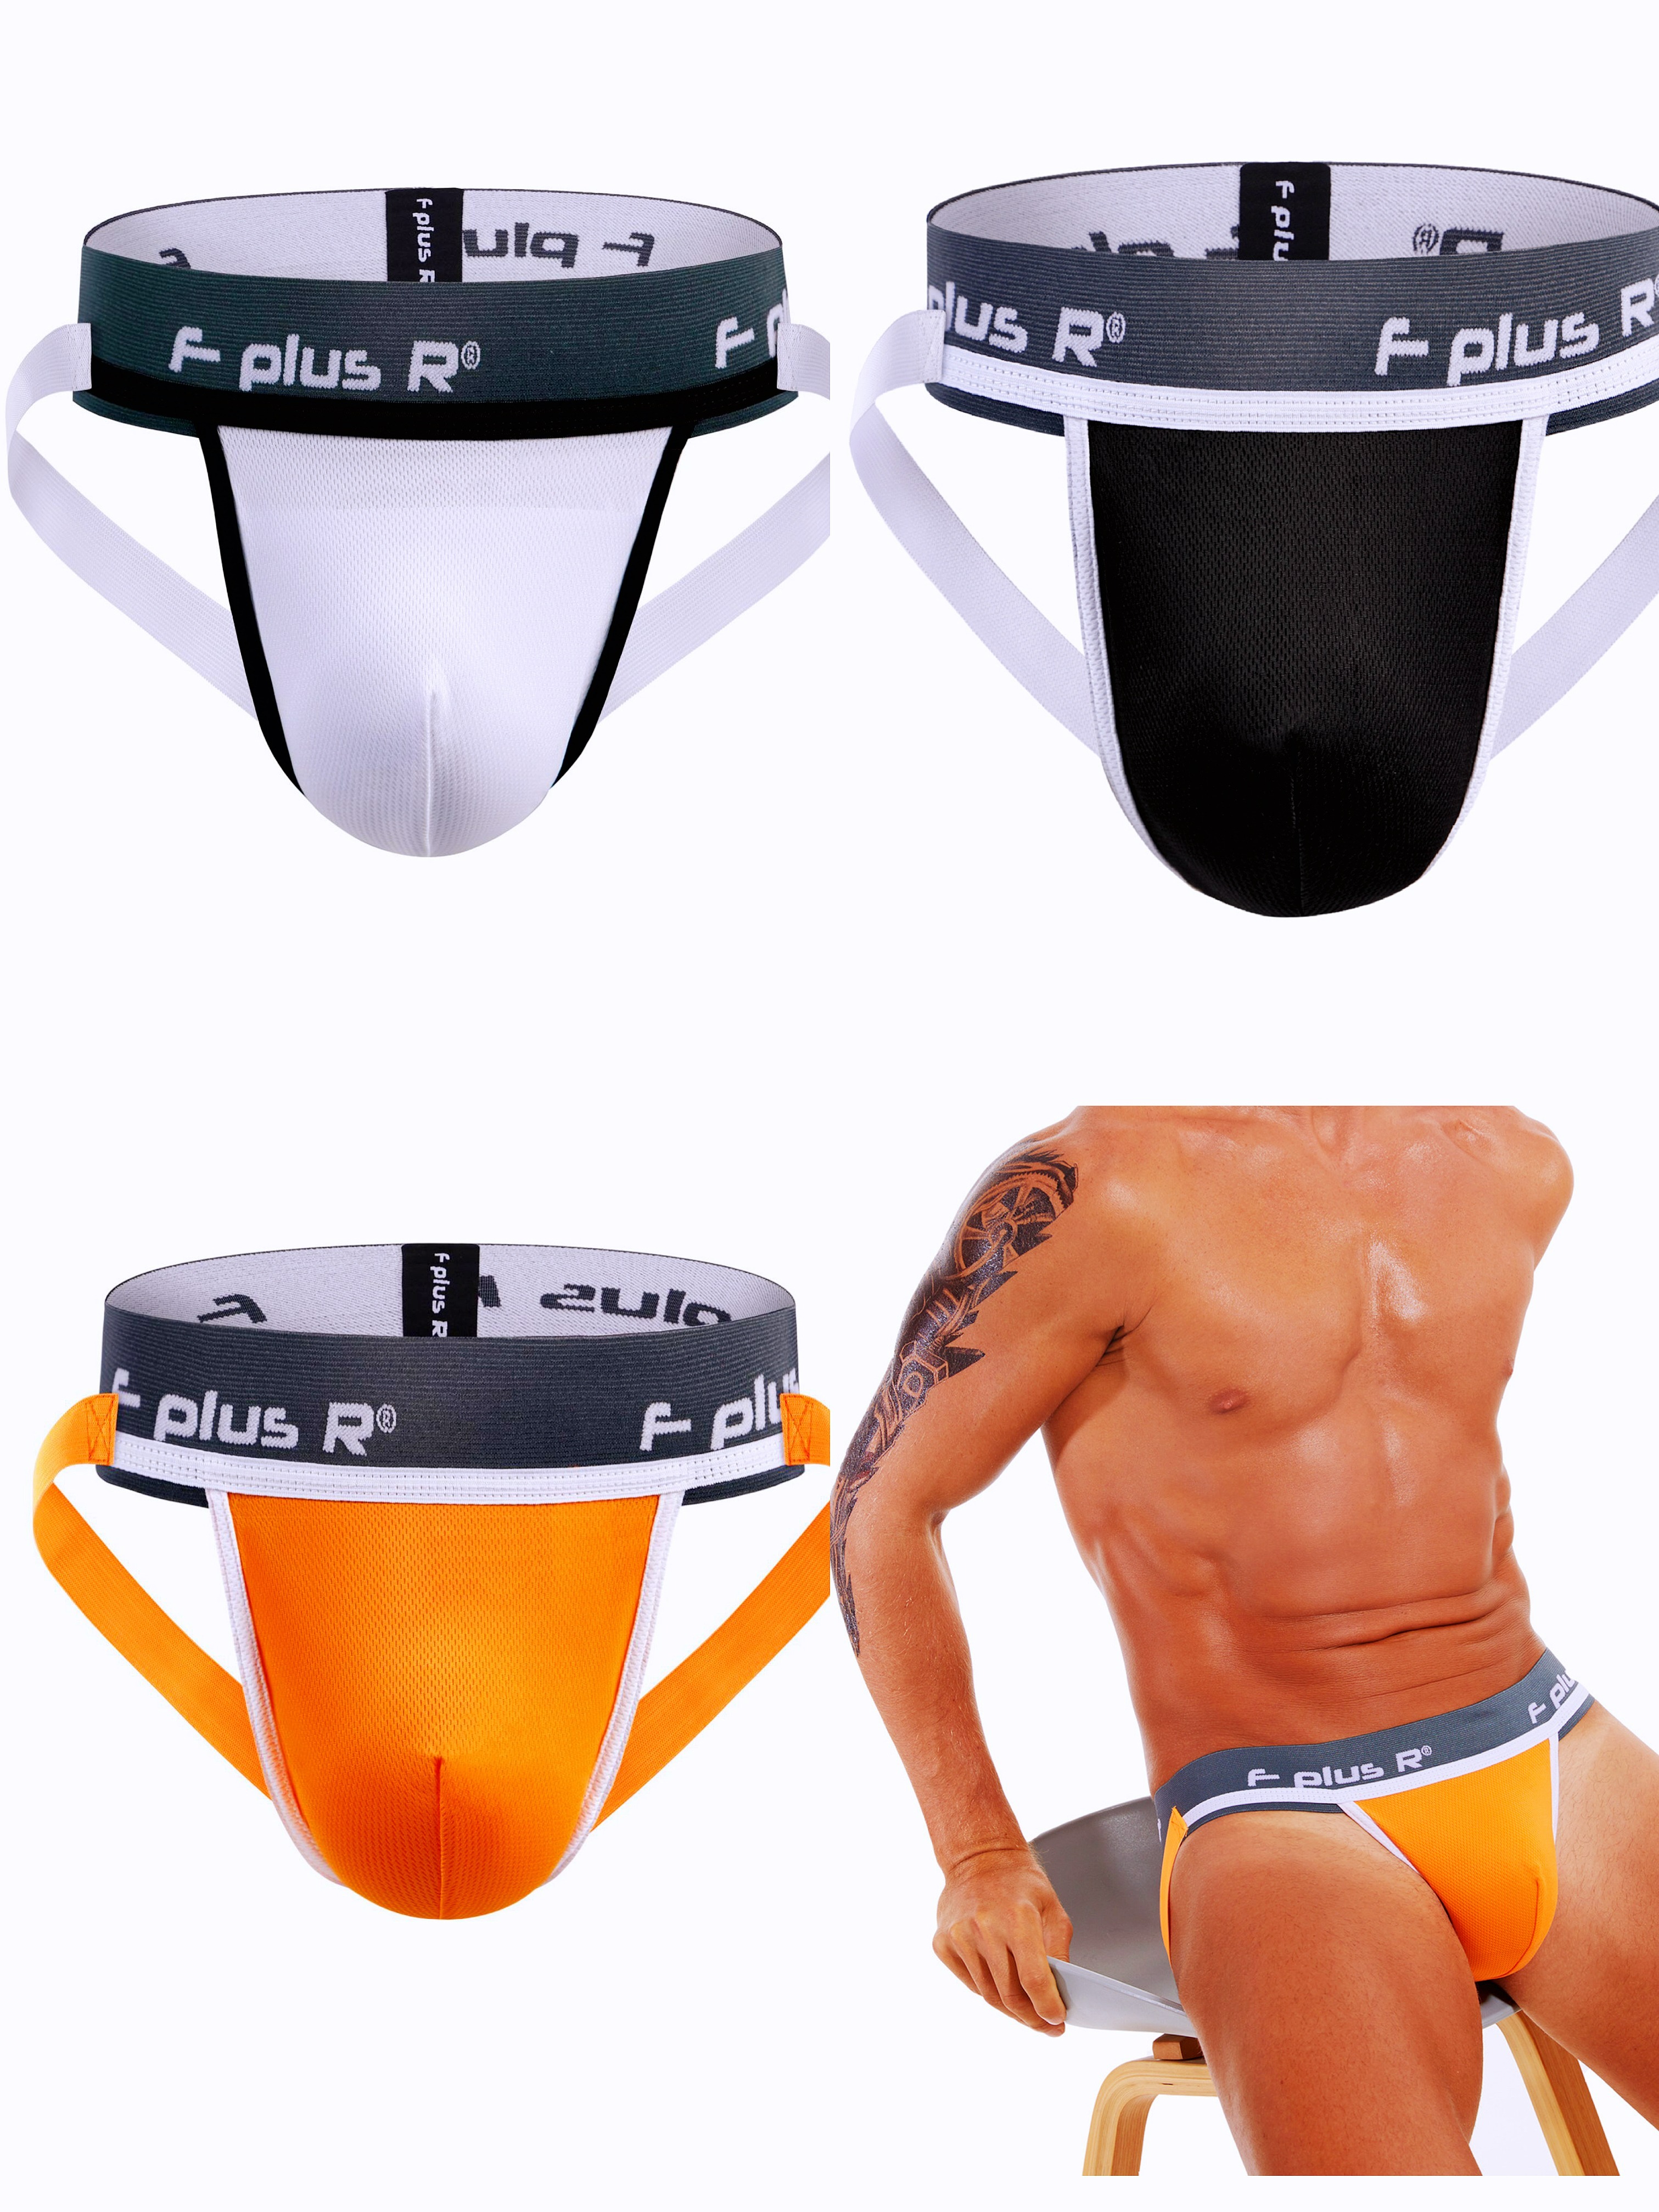  Jockstrap With Cup